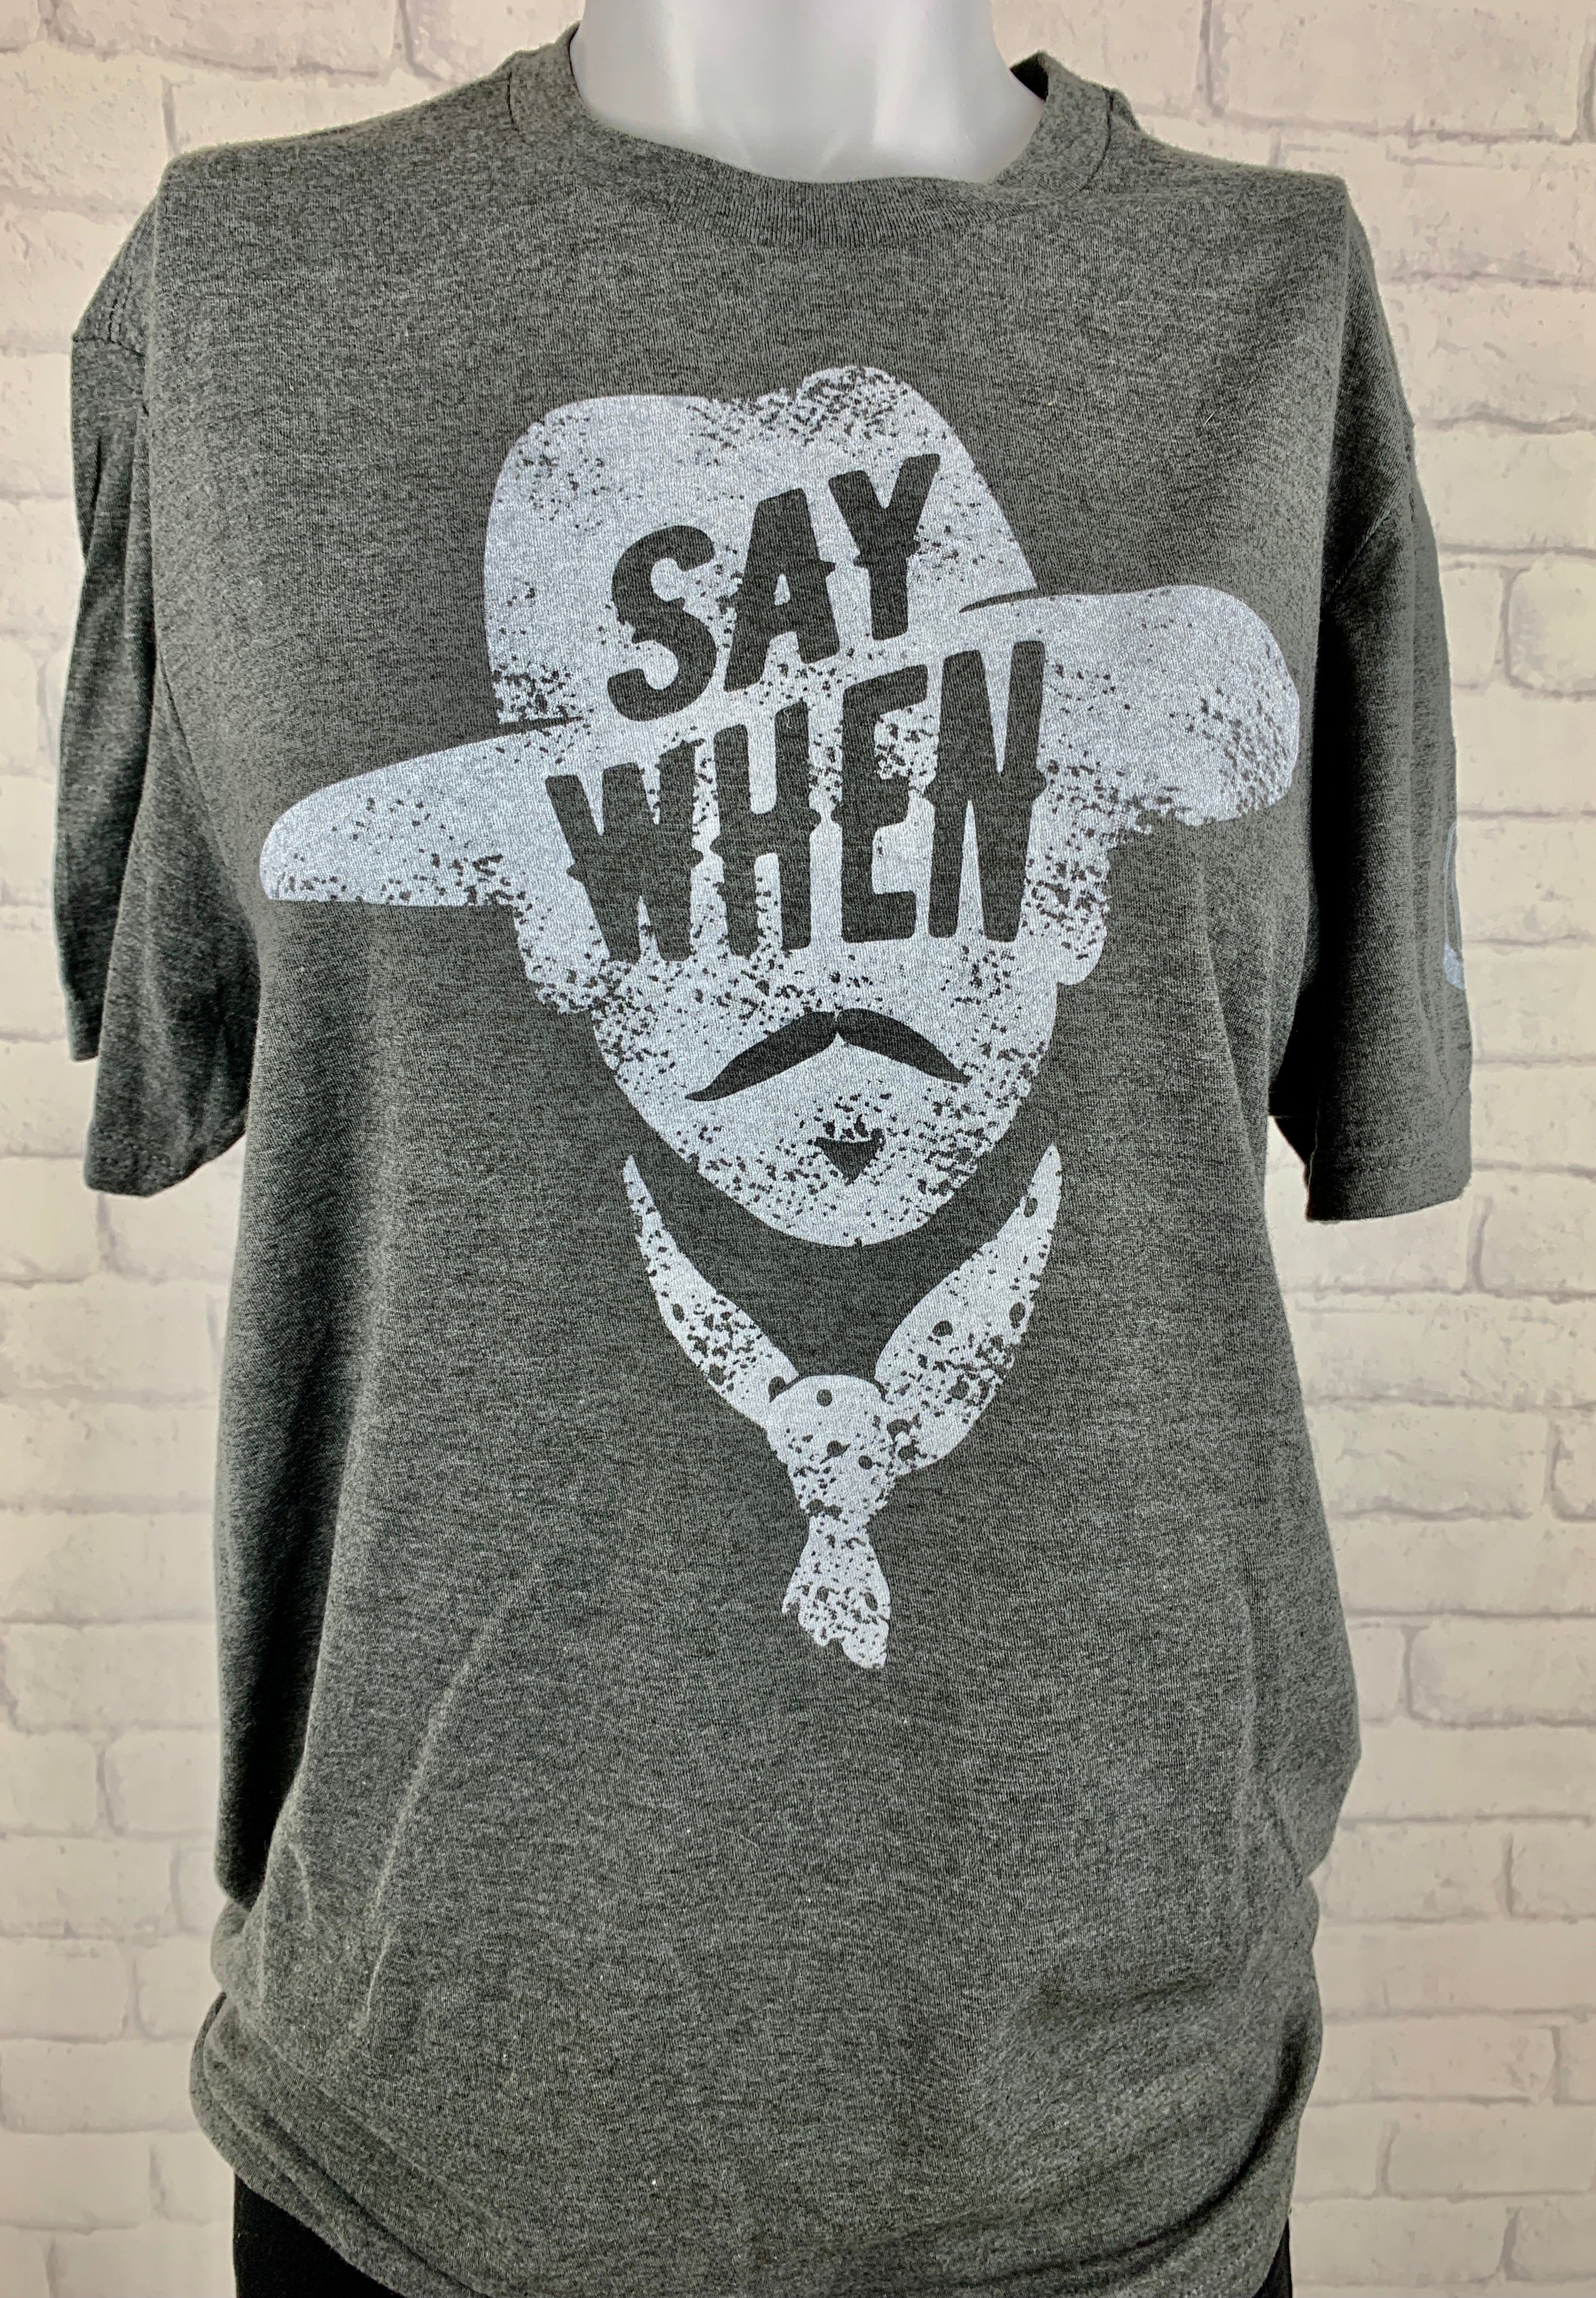 Say When - Vintage Charcoal.